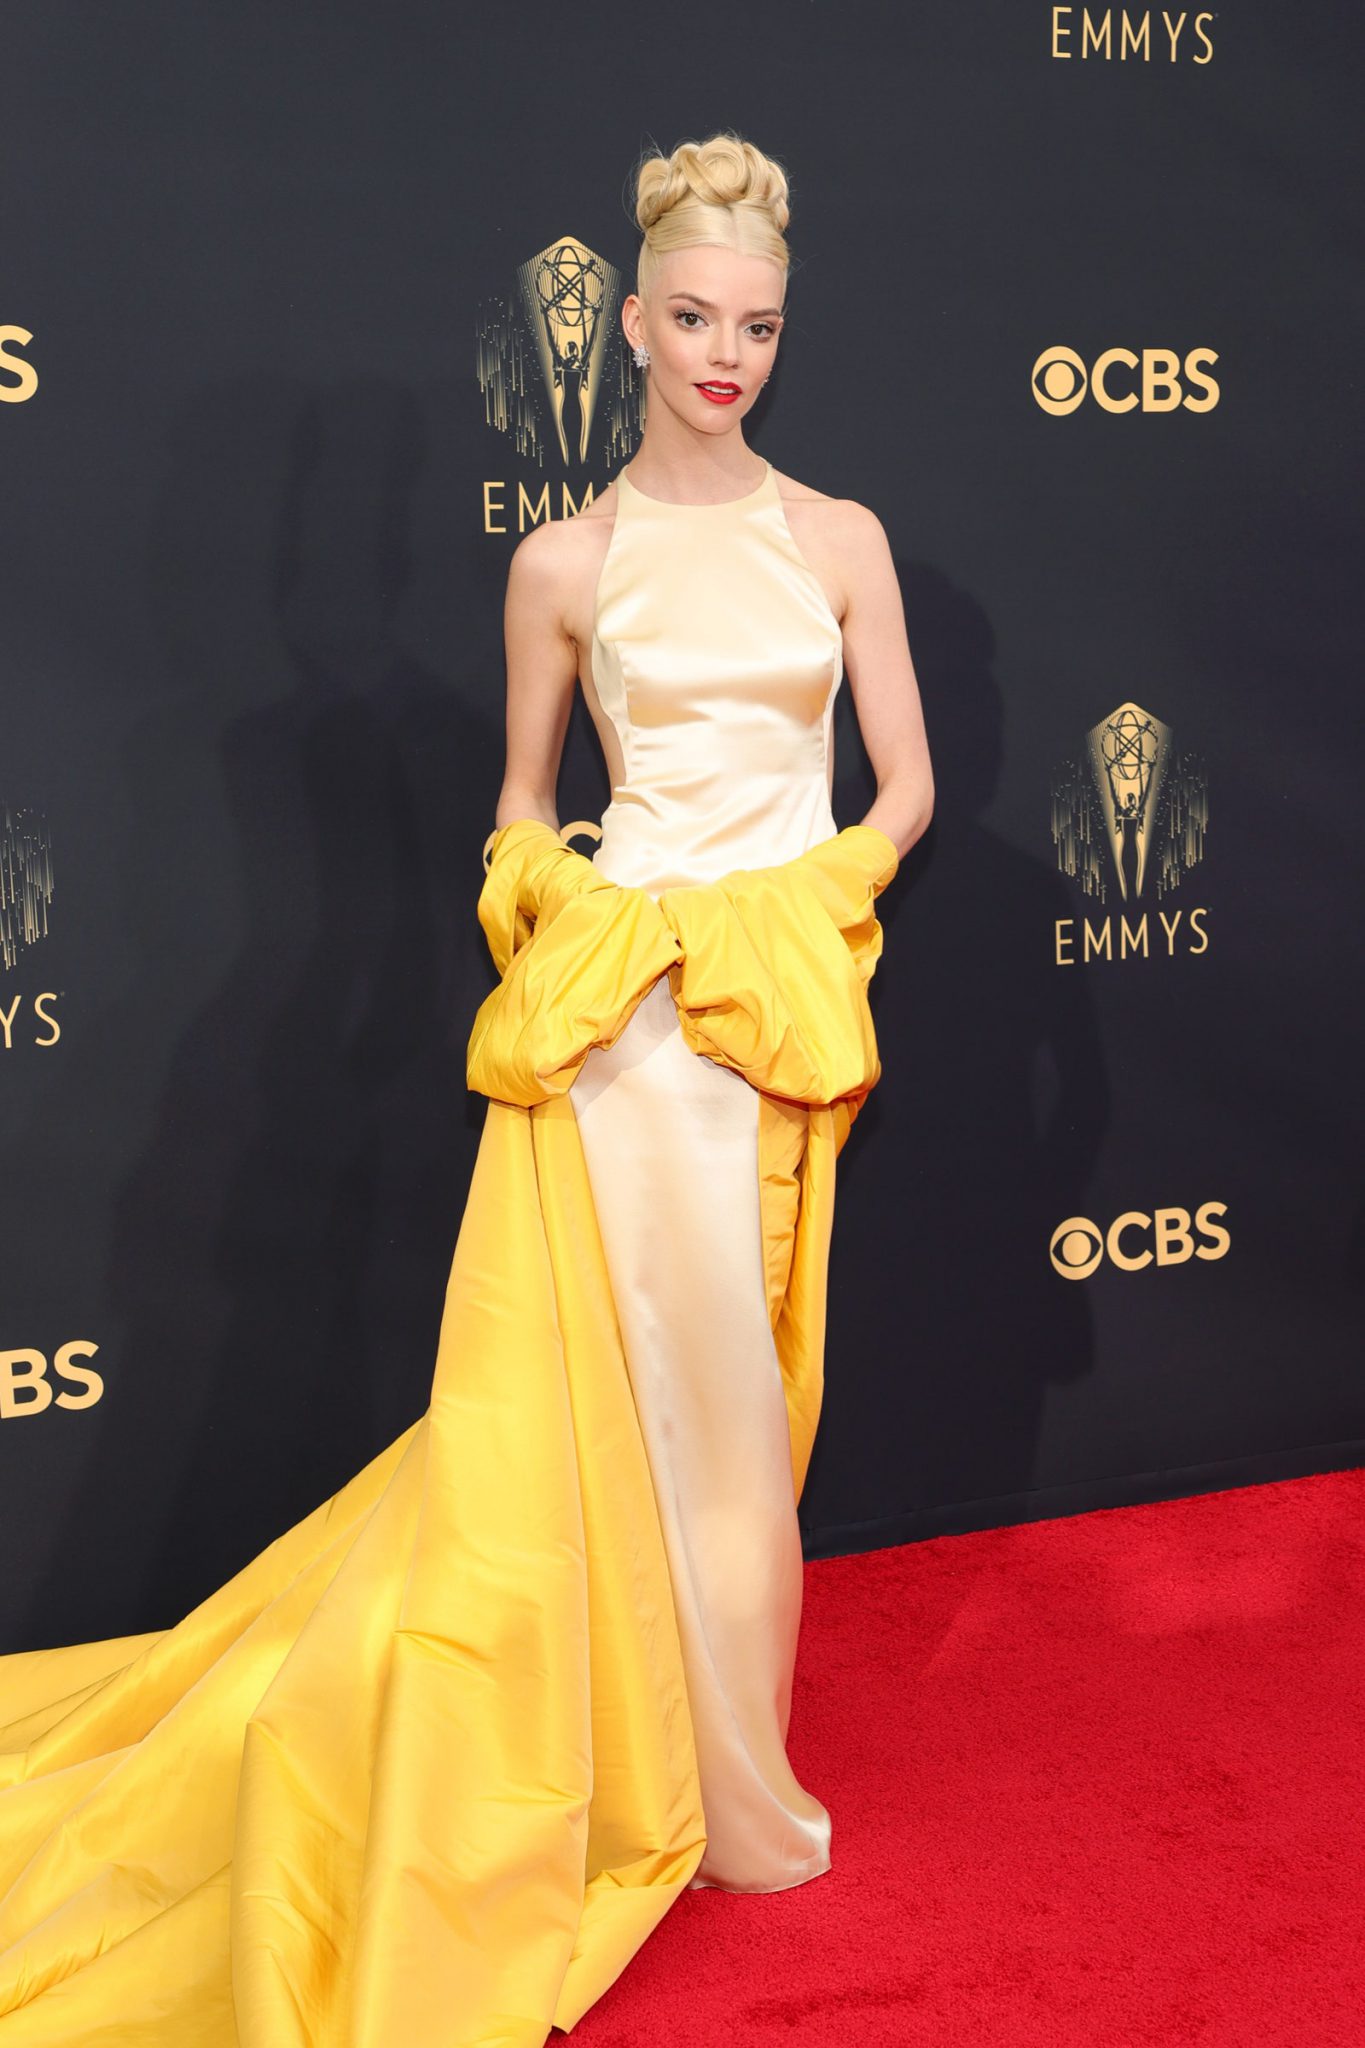 All The Best Red Carpet Style Looks At The 2021 Emmy Awards